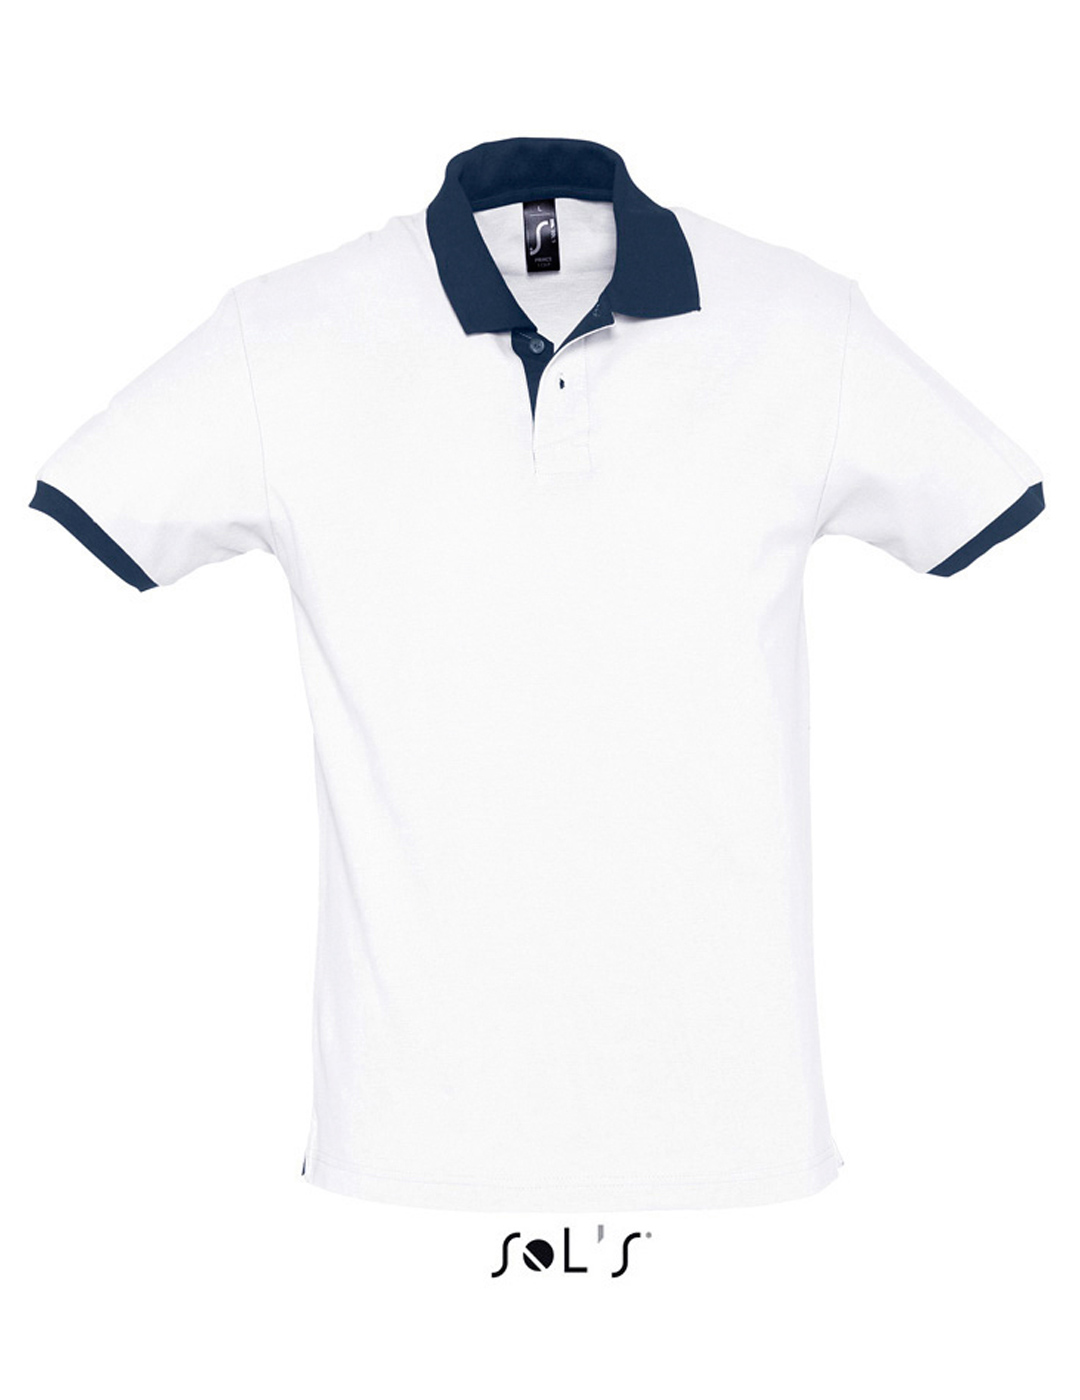 Prince 11369 white french navy a